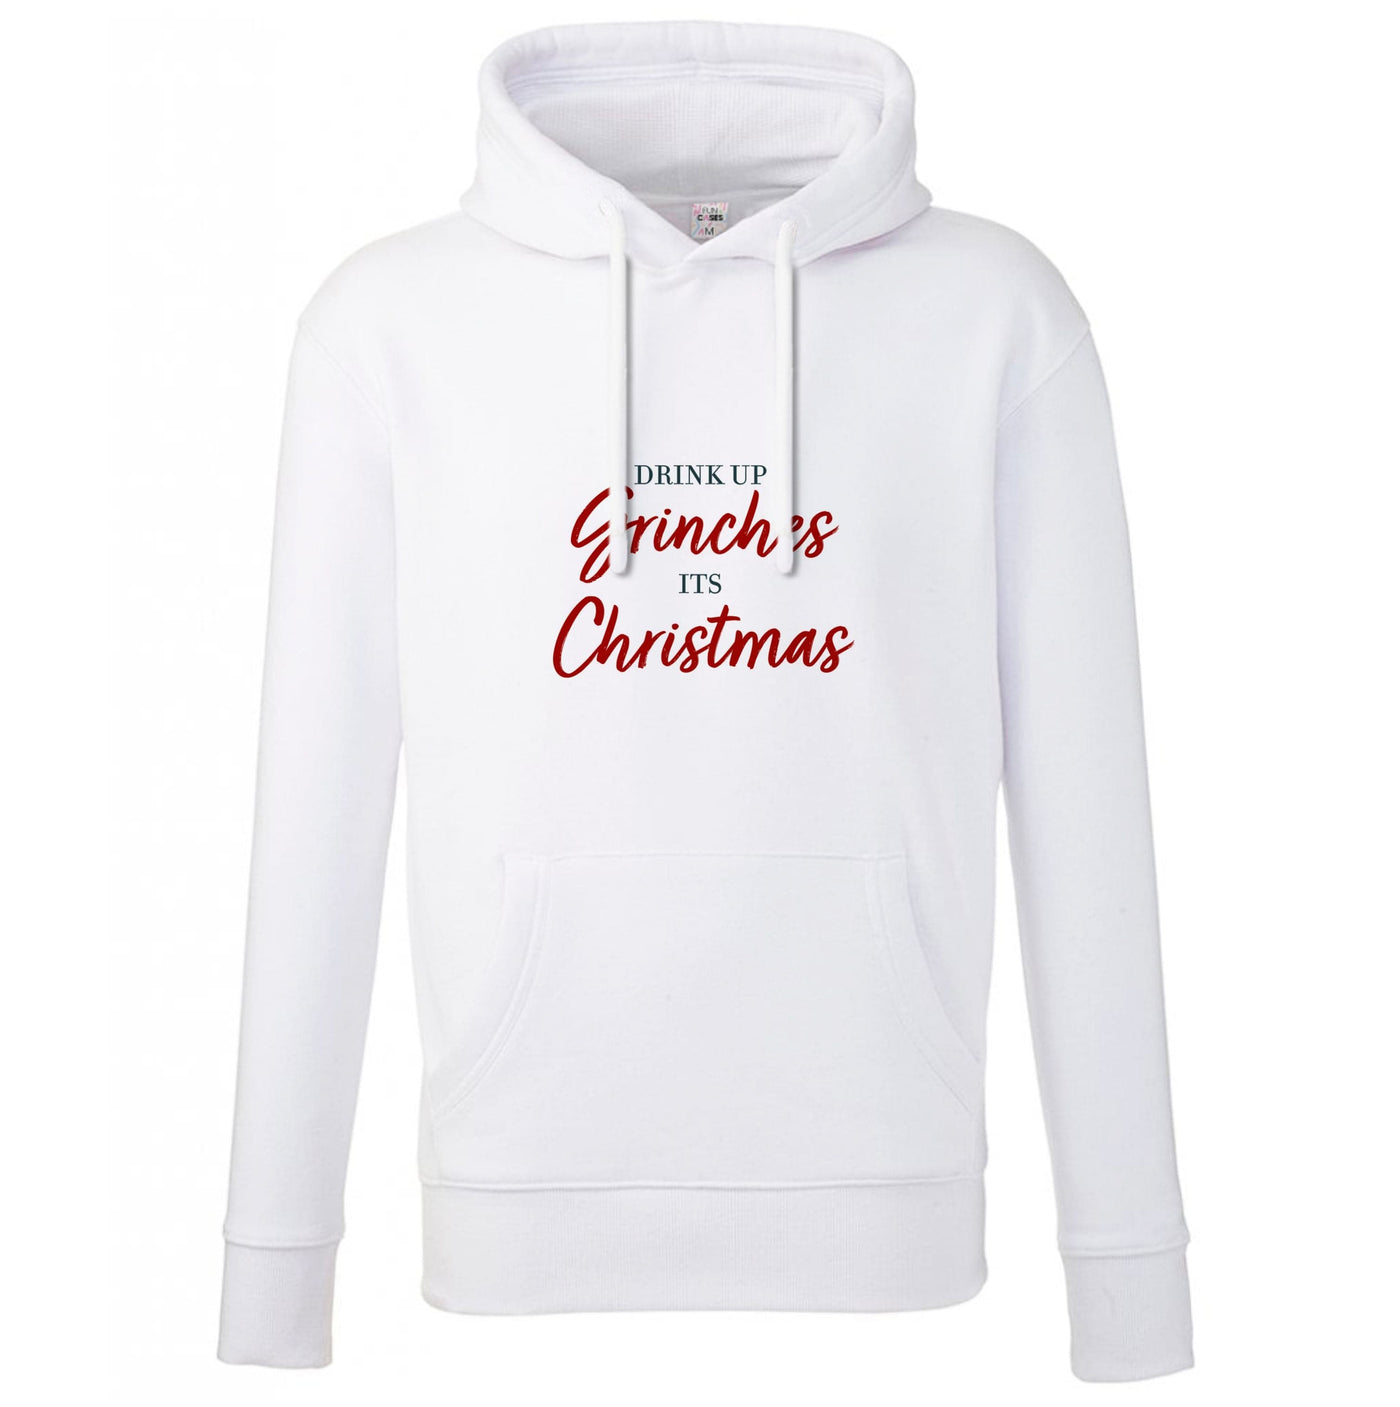 Drink Up Grinches - Grinch Hoodie